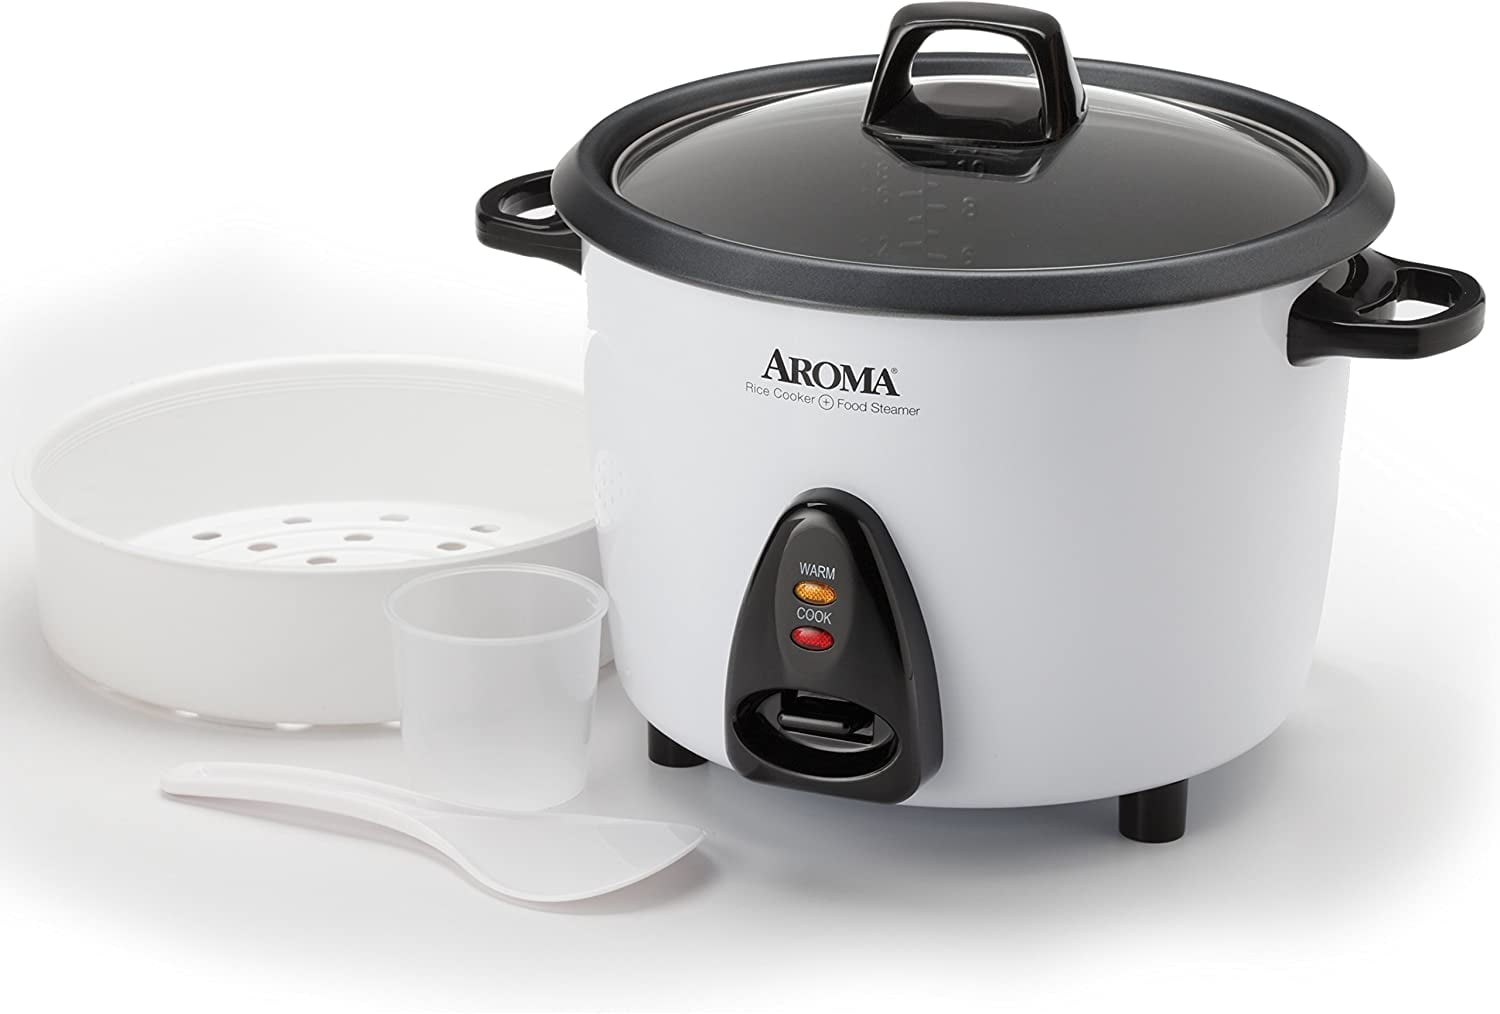 Best Buy: Aroma 20-Cup Rice Cooker Black ARC930SB